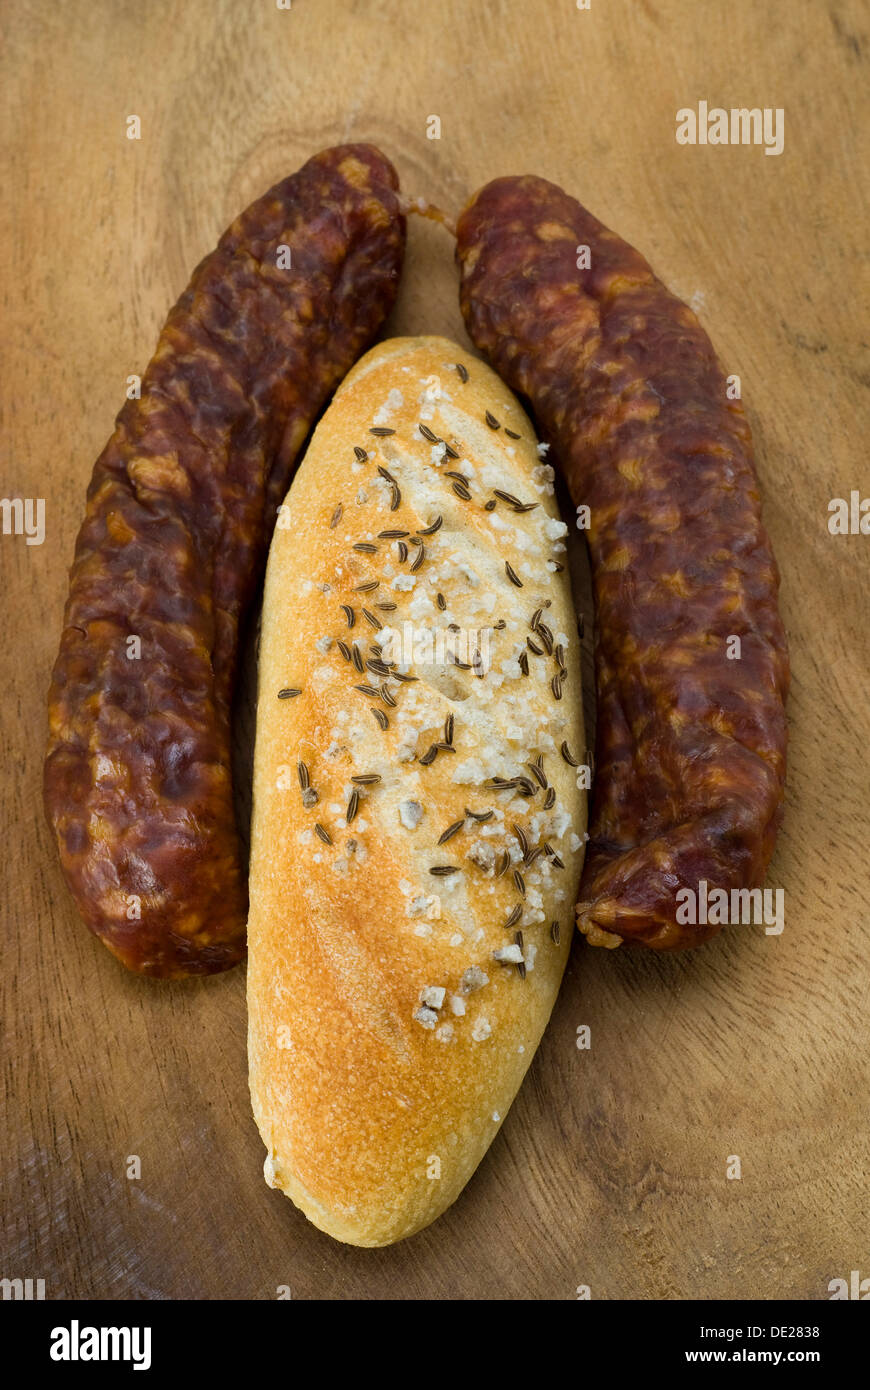 Polish sausages and salted roll Stock Photo